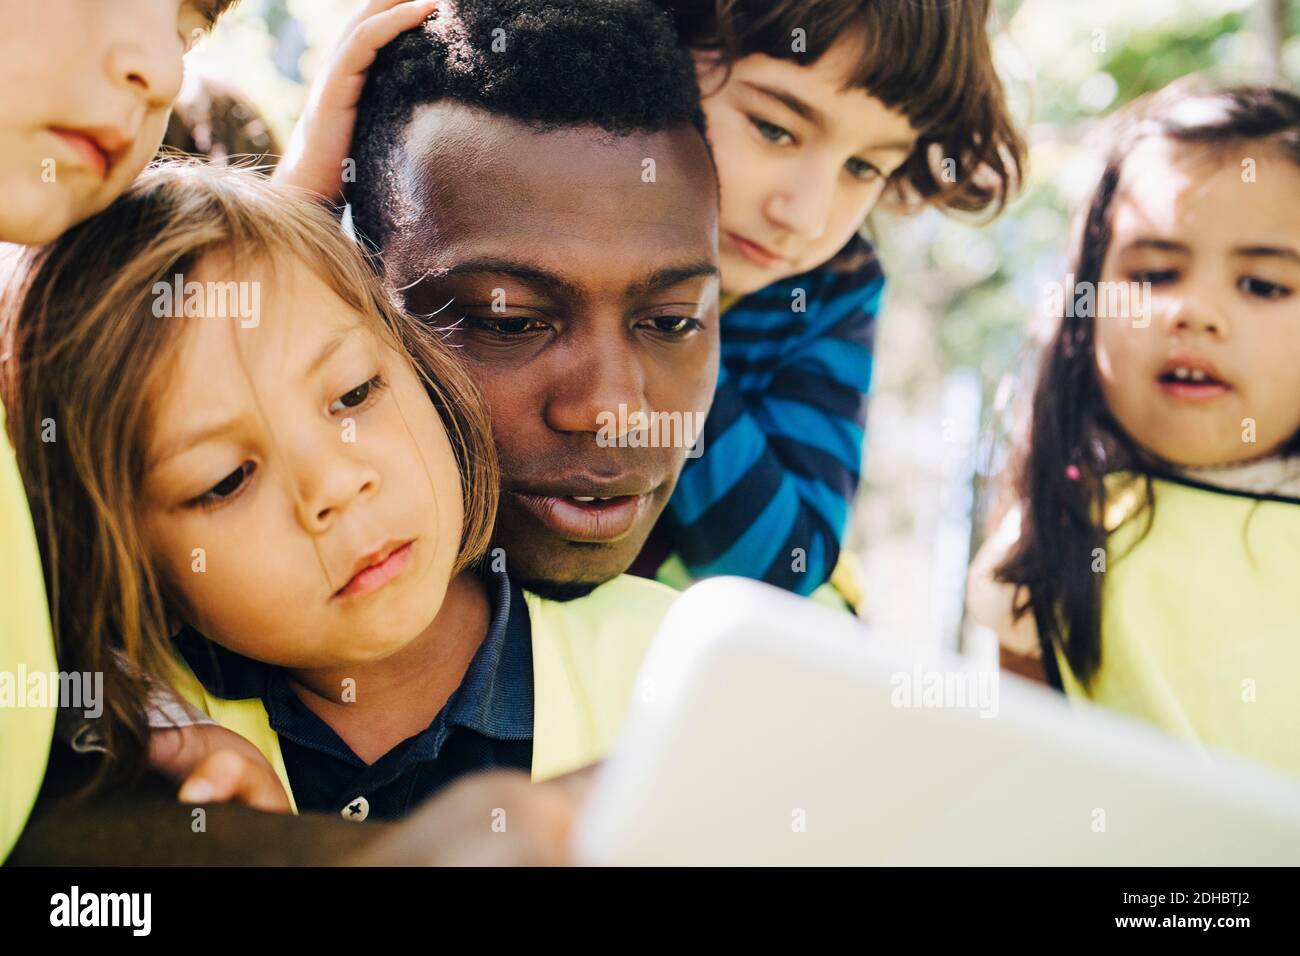 Male teacher sharing digital tablet with students in playground Stock Photo